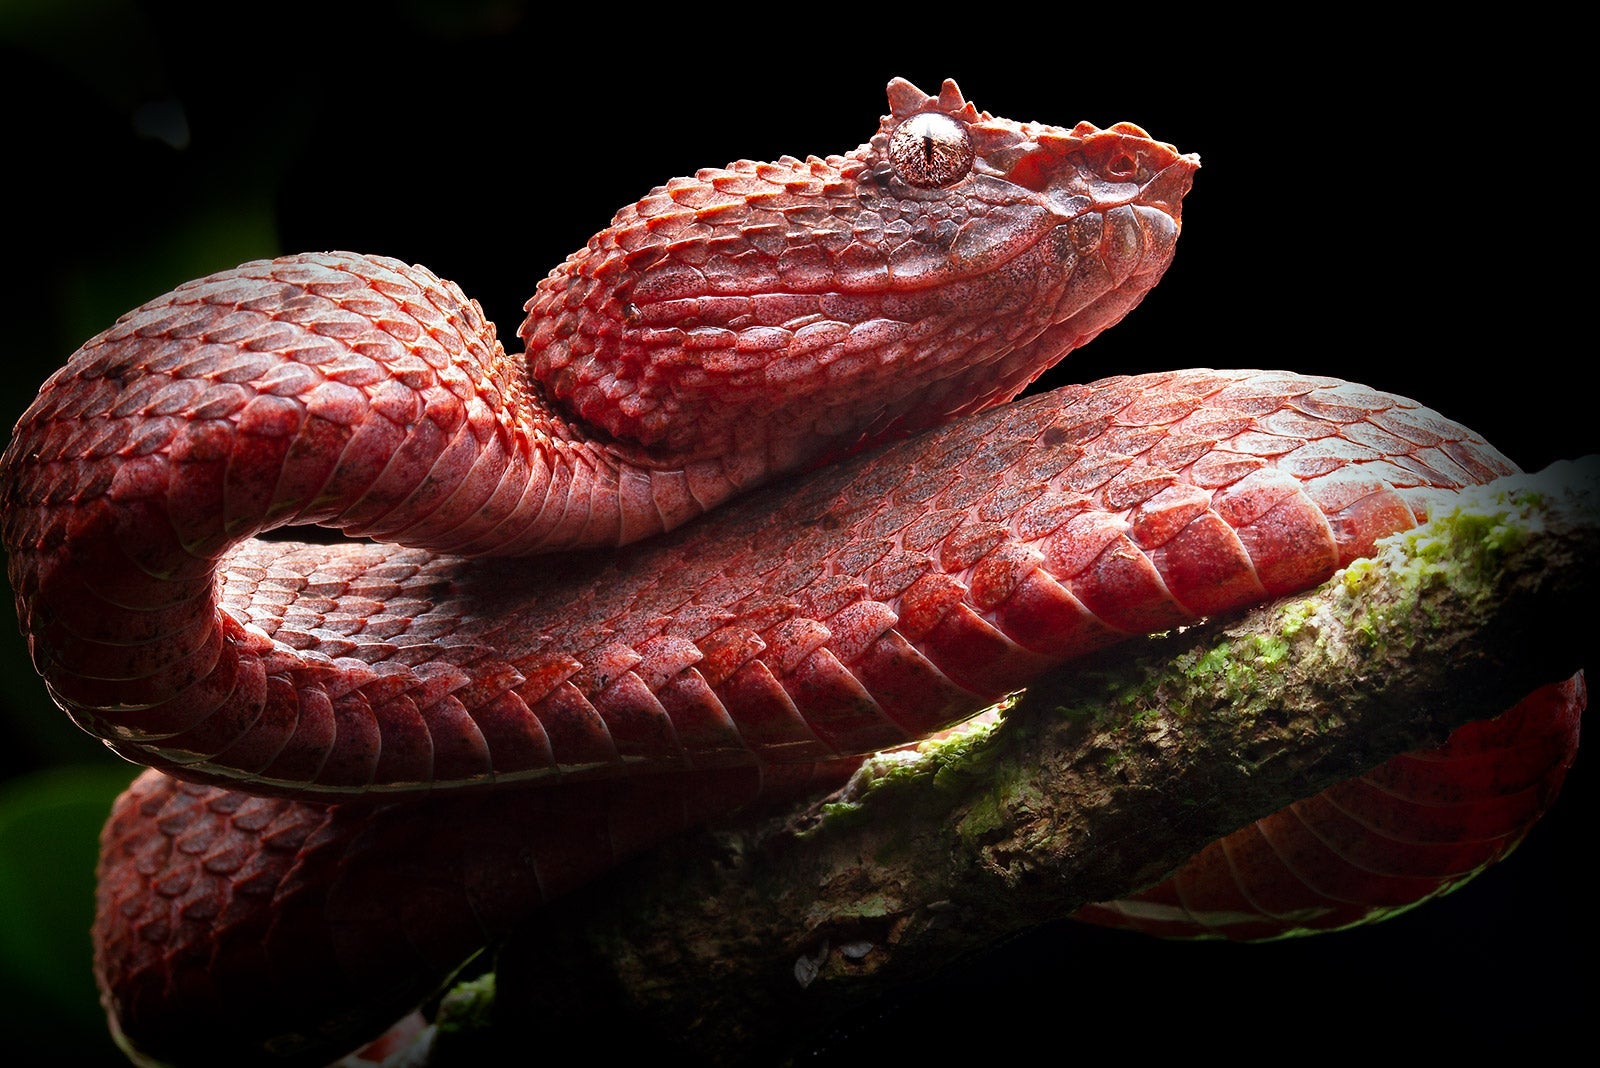 An Evolutionary 'Big Bang' Explains Why Snakes Come in So Many Strange Varieties